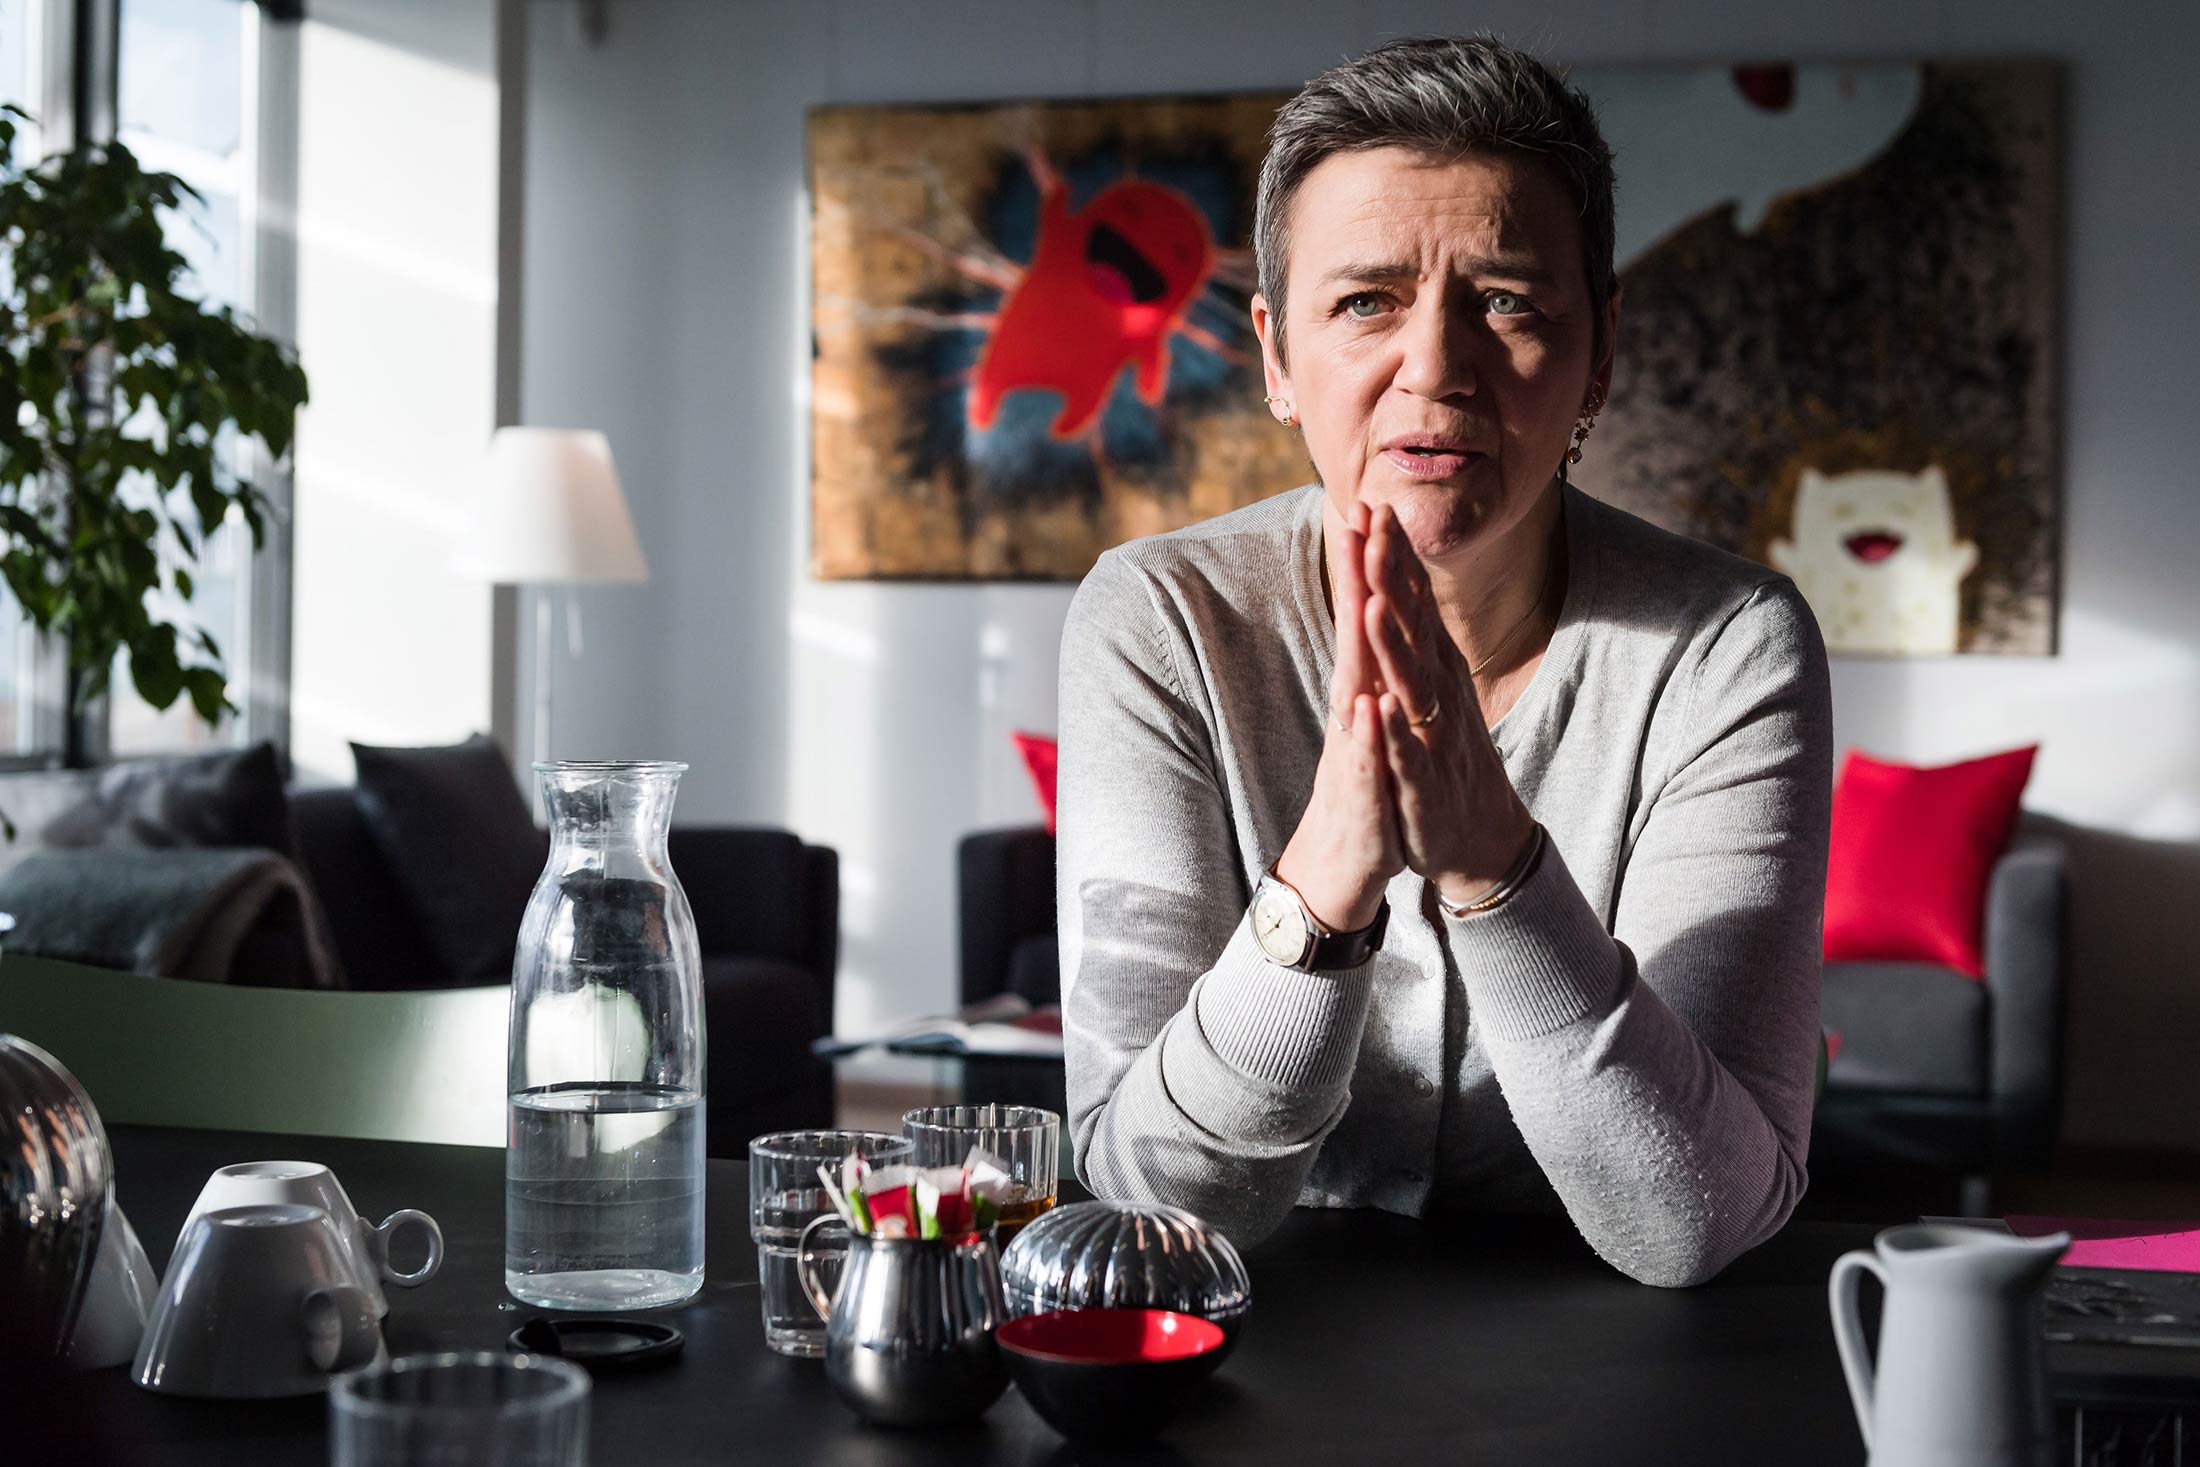 Margrethe Vestager during an interview in her Brussels office on Feb. 25.